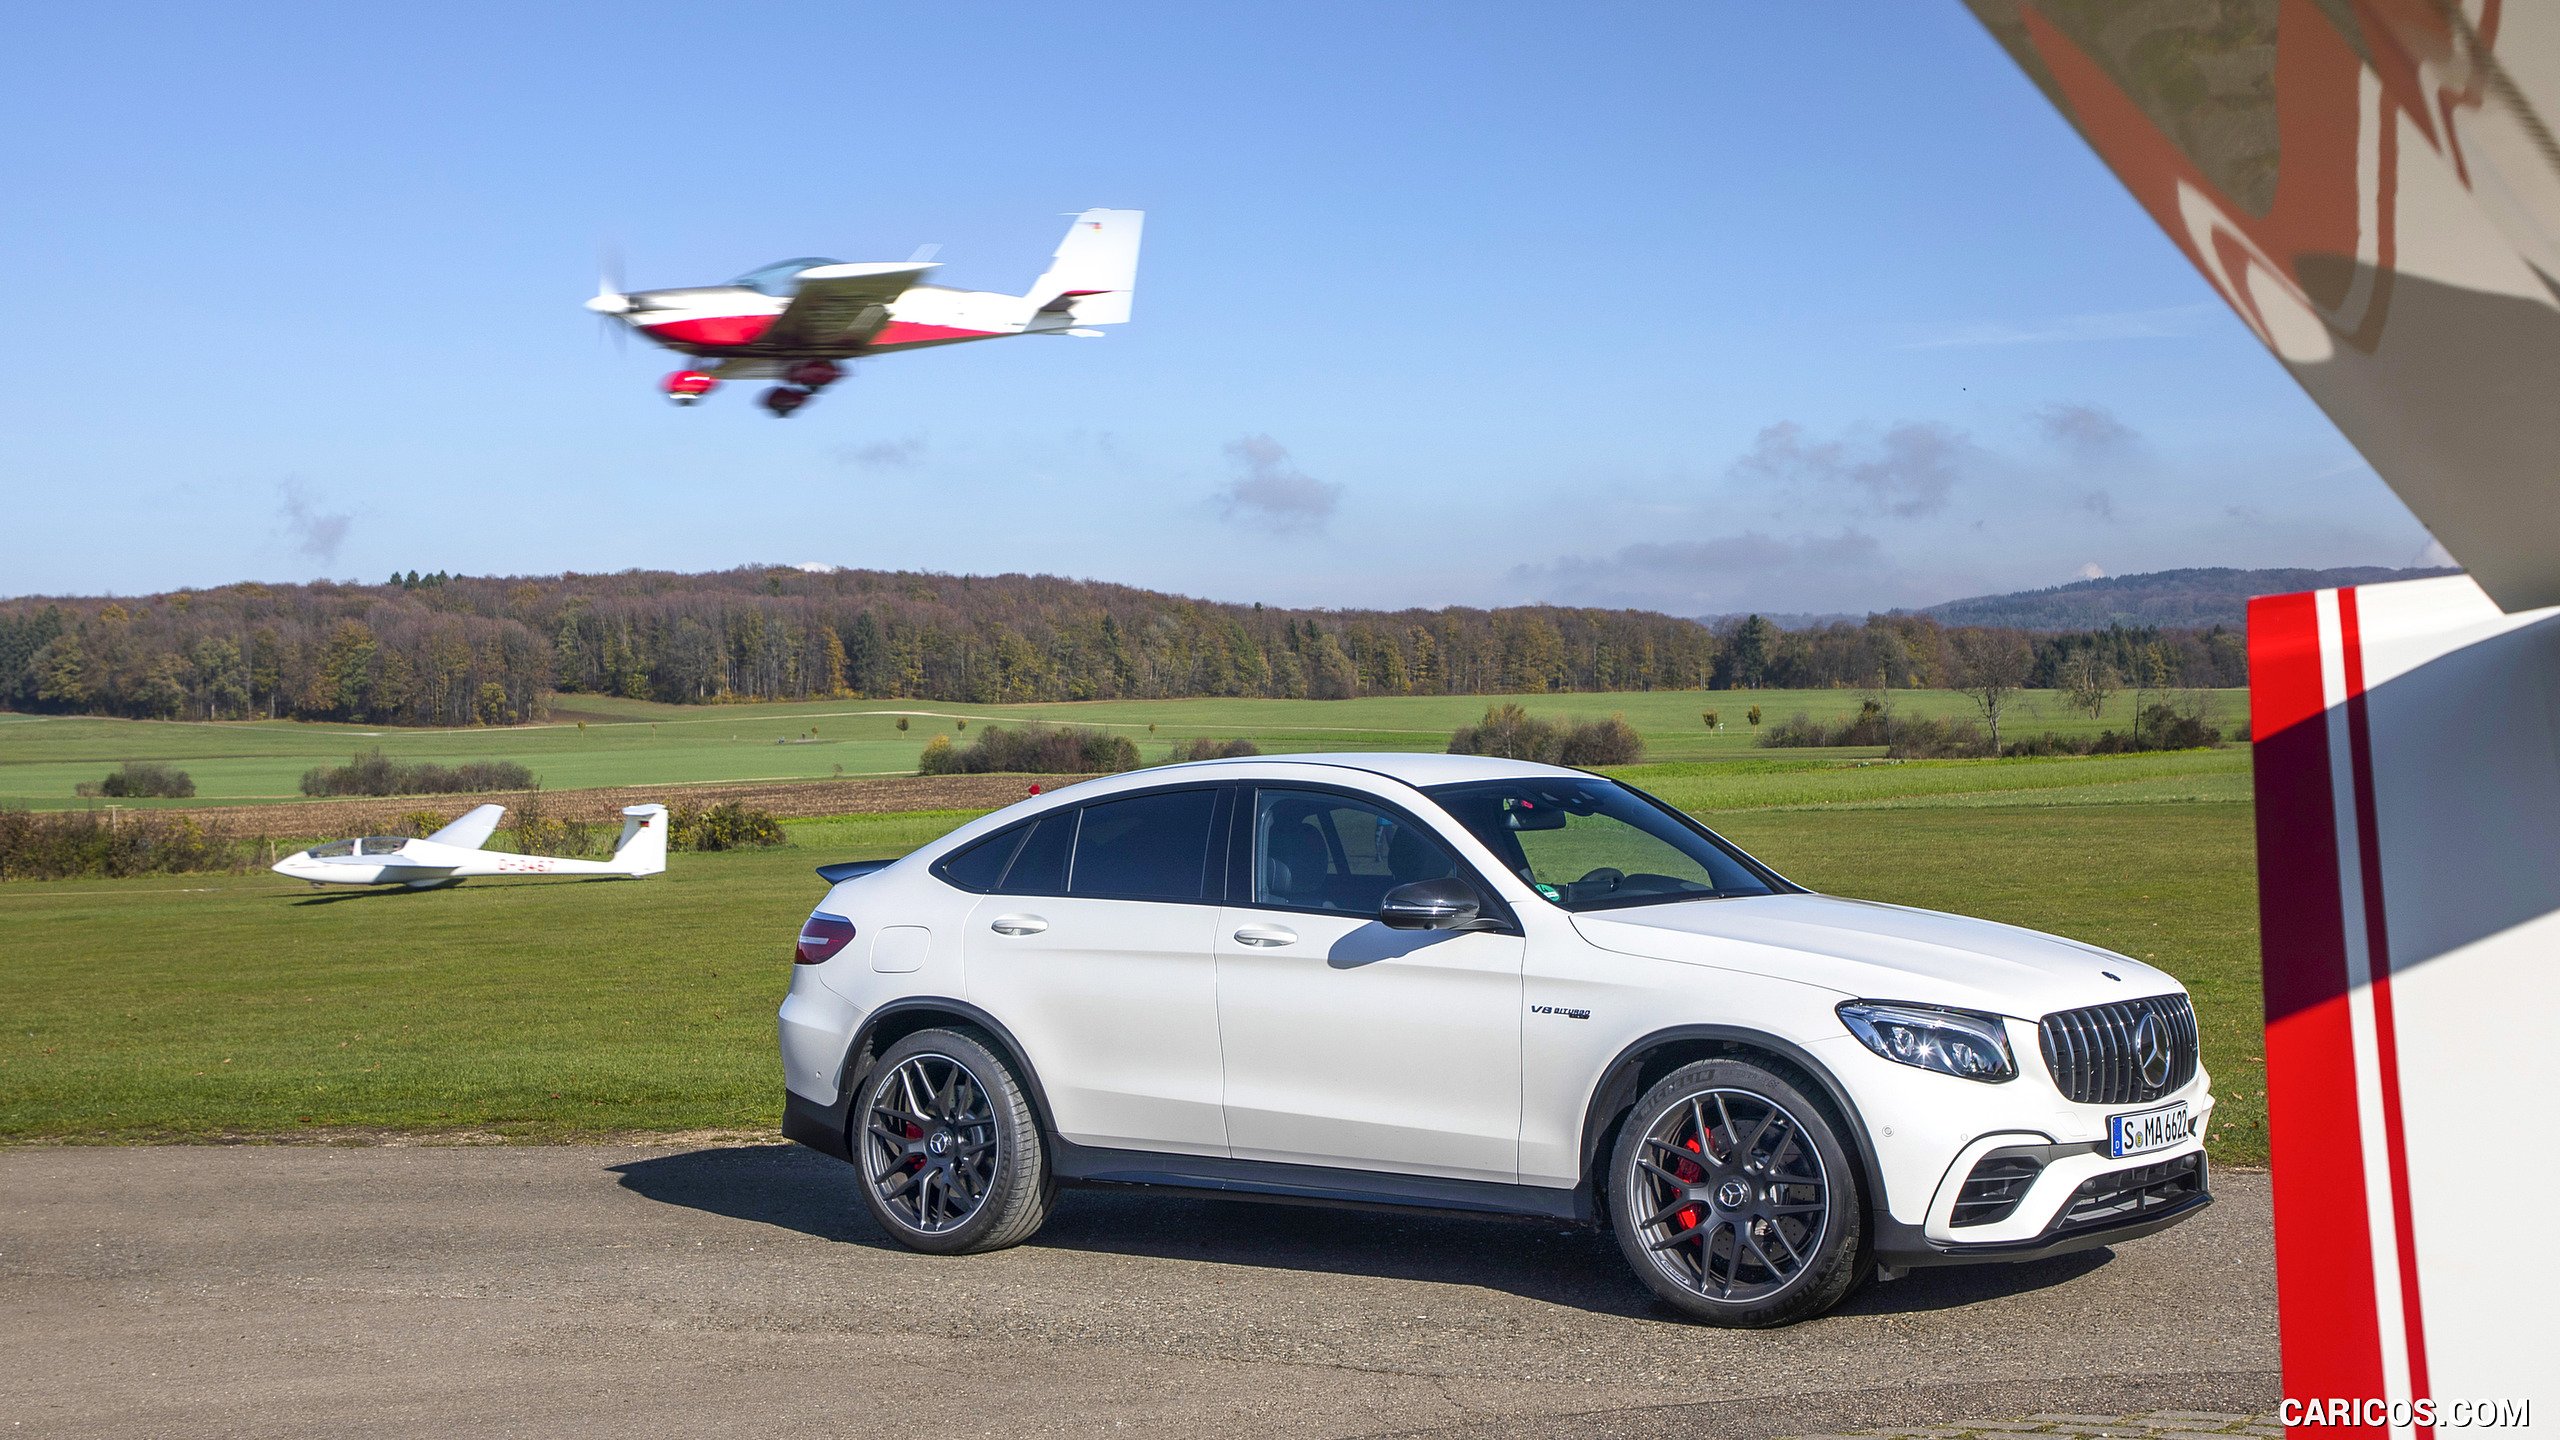 2018 Mercedes-AMG GLC 63 S Coupe - Front Three-Quarter, #34 of 75